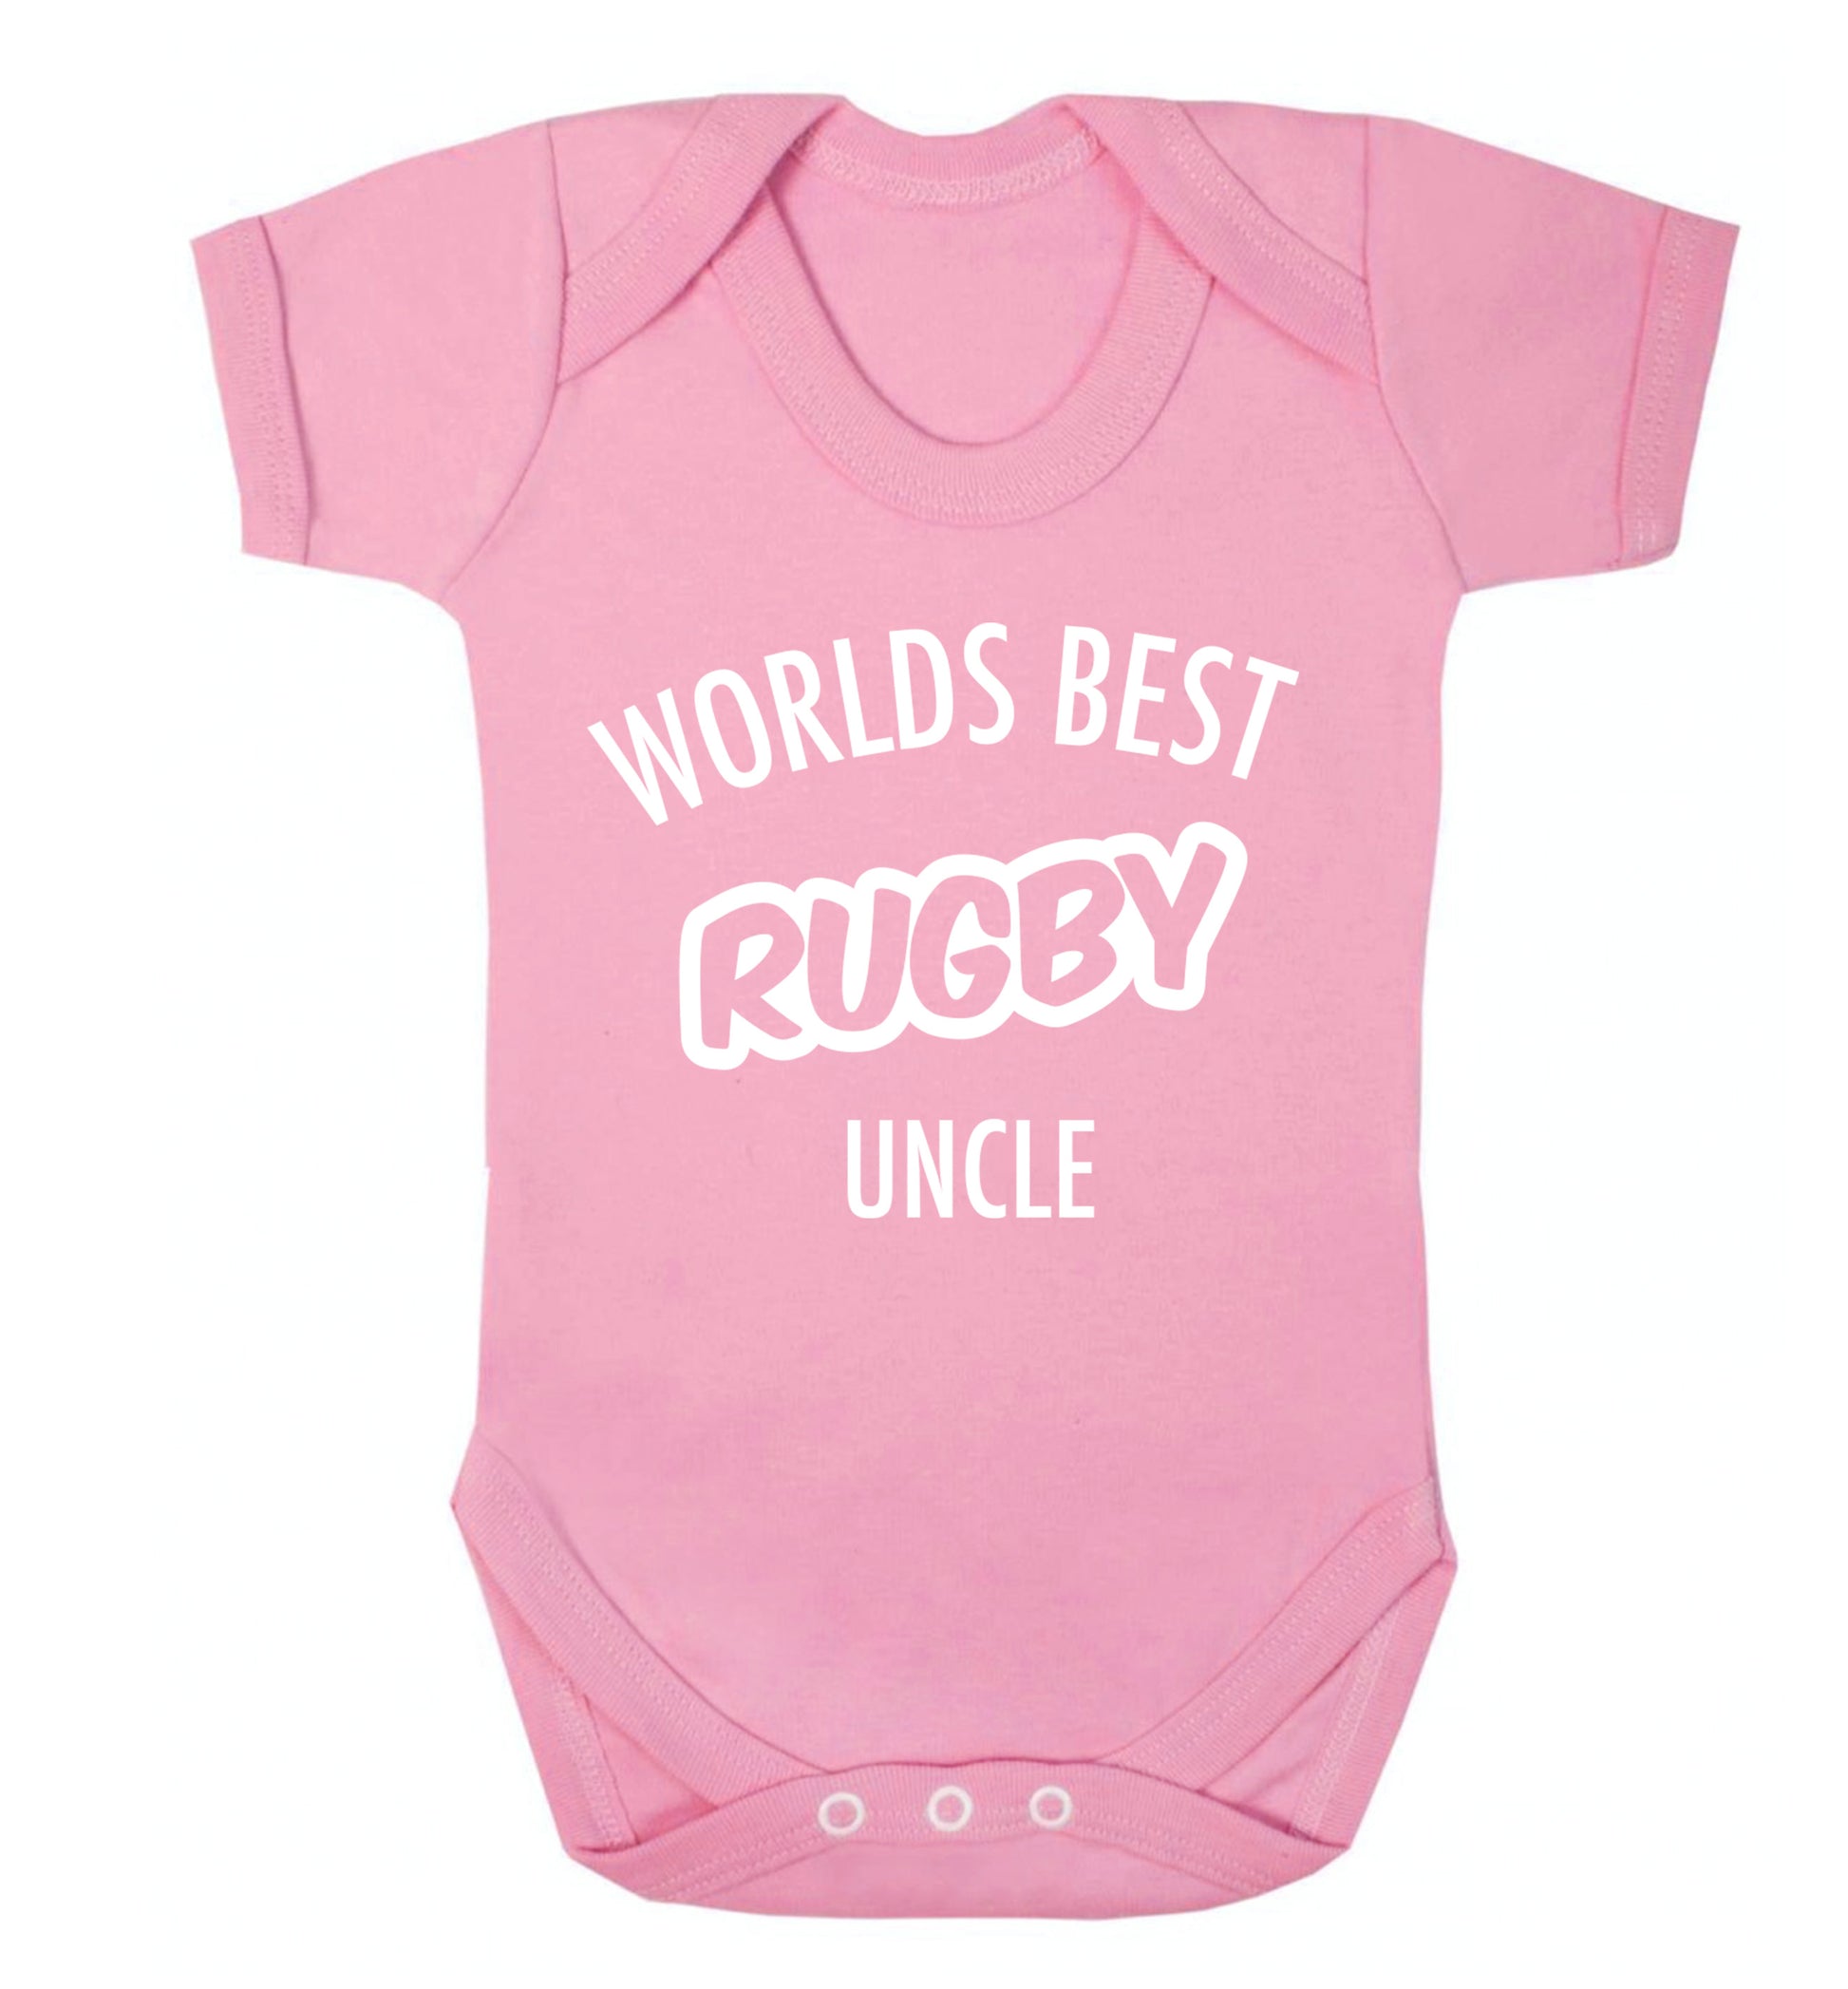 Worlds best rugby uncle Baby Vest pale pink 18-24 months